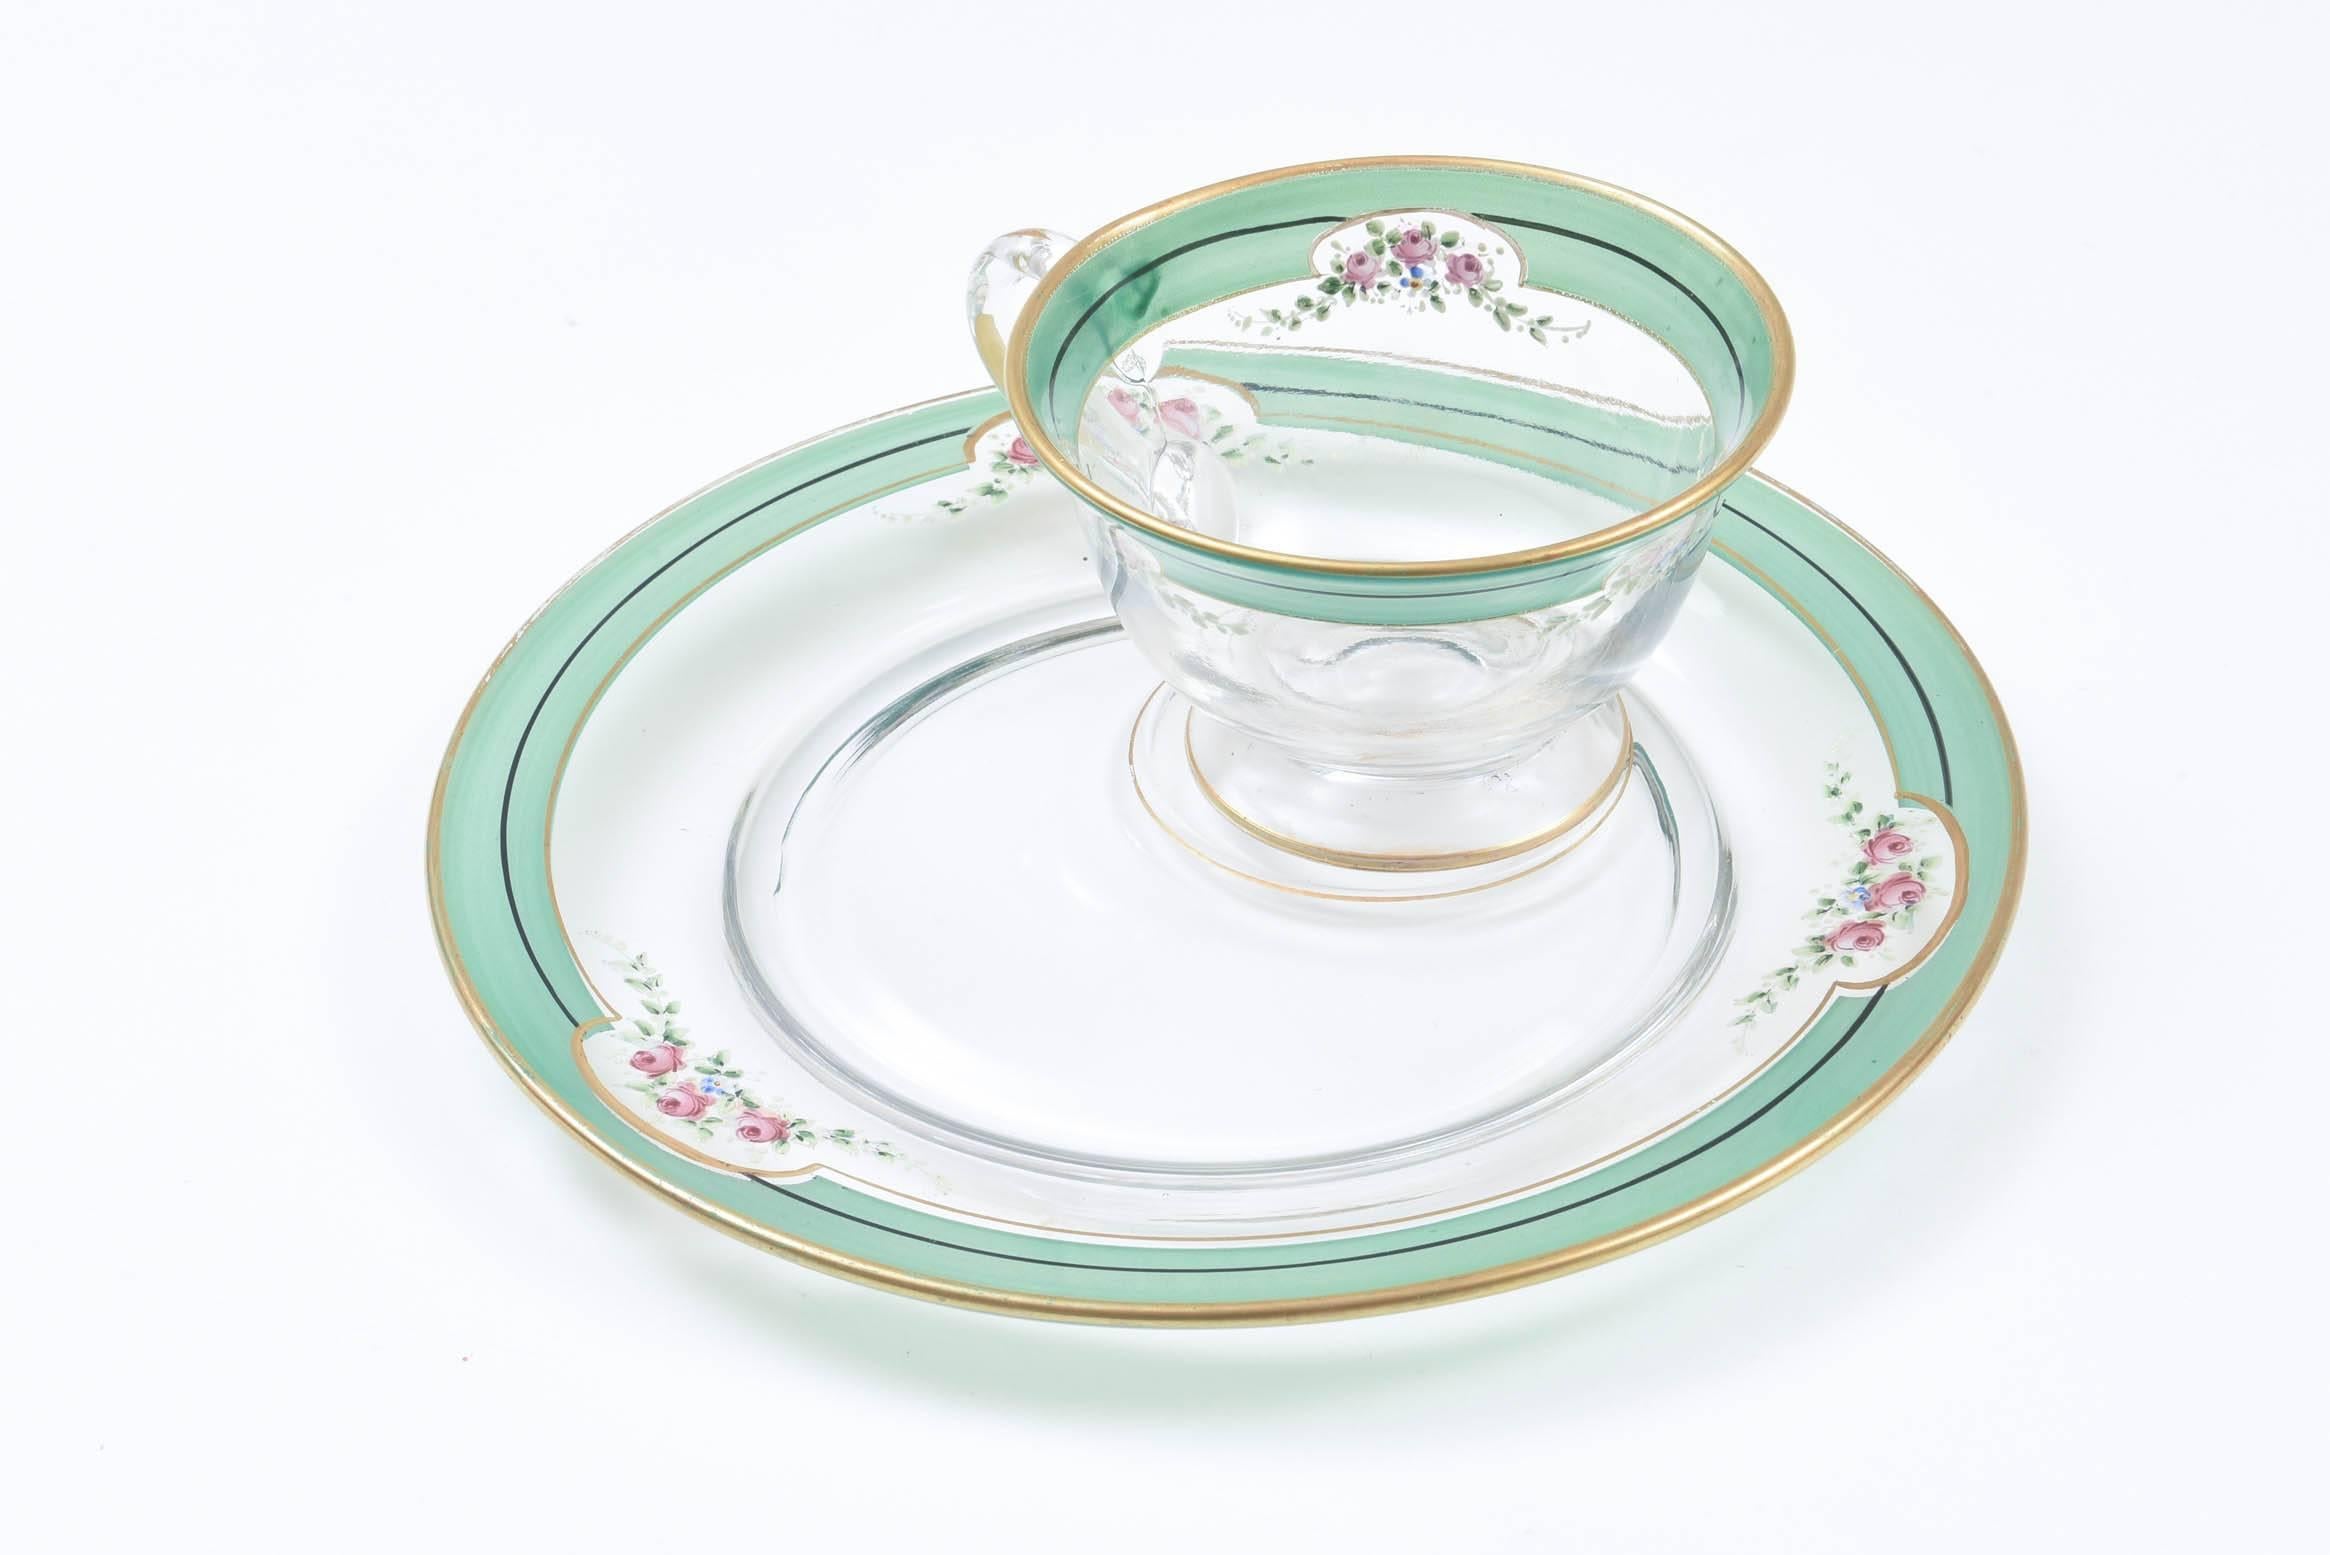 American 12 Sets Dessert Plates and Cups, Glass with Hand-Painted Florals, Gilt Trimmed